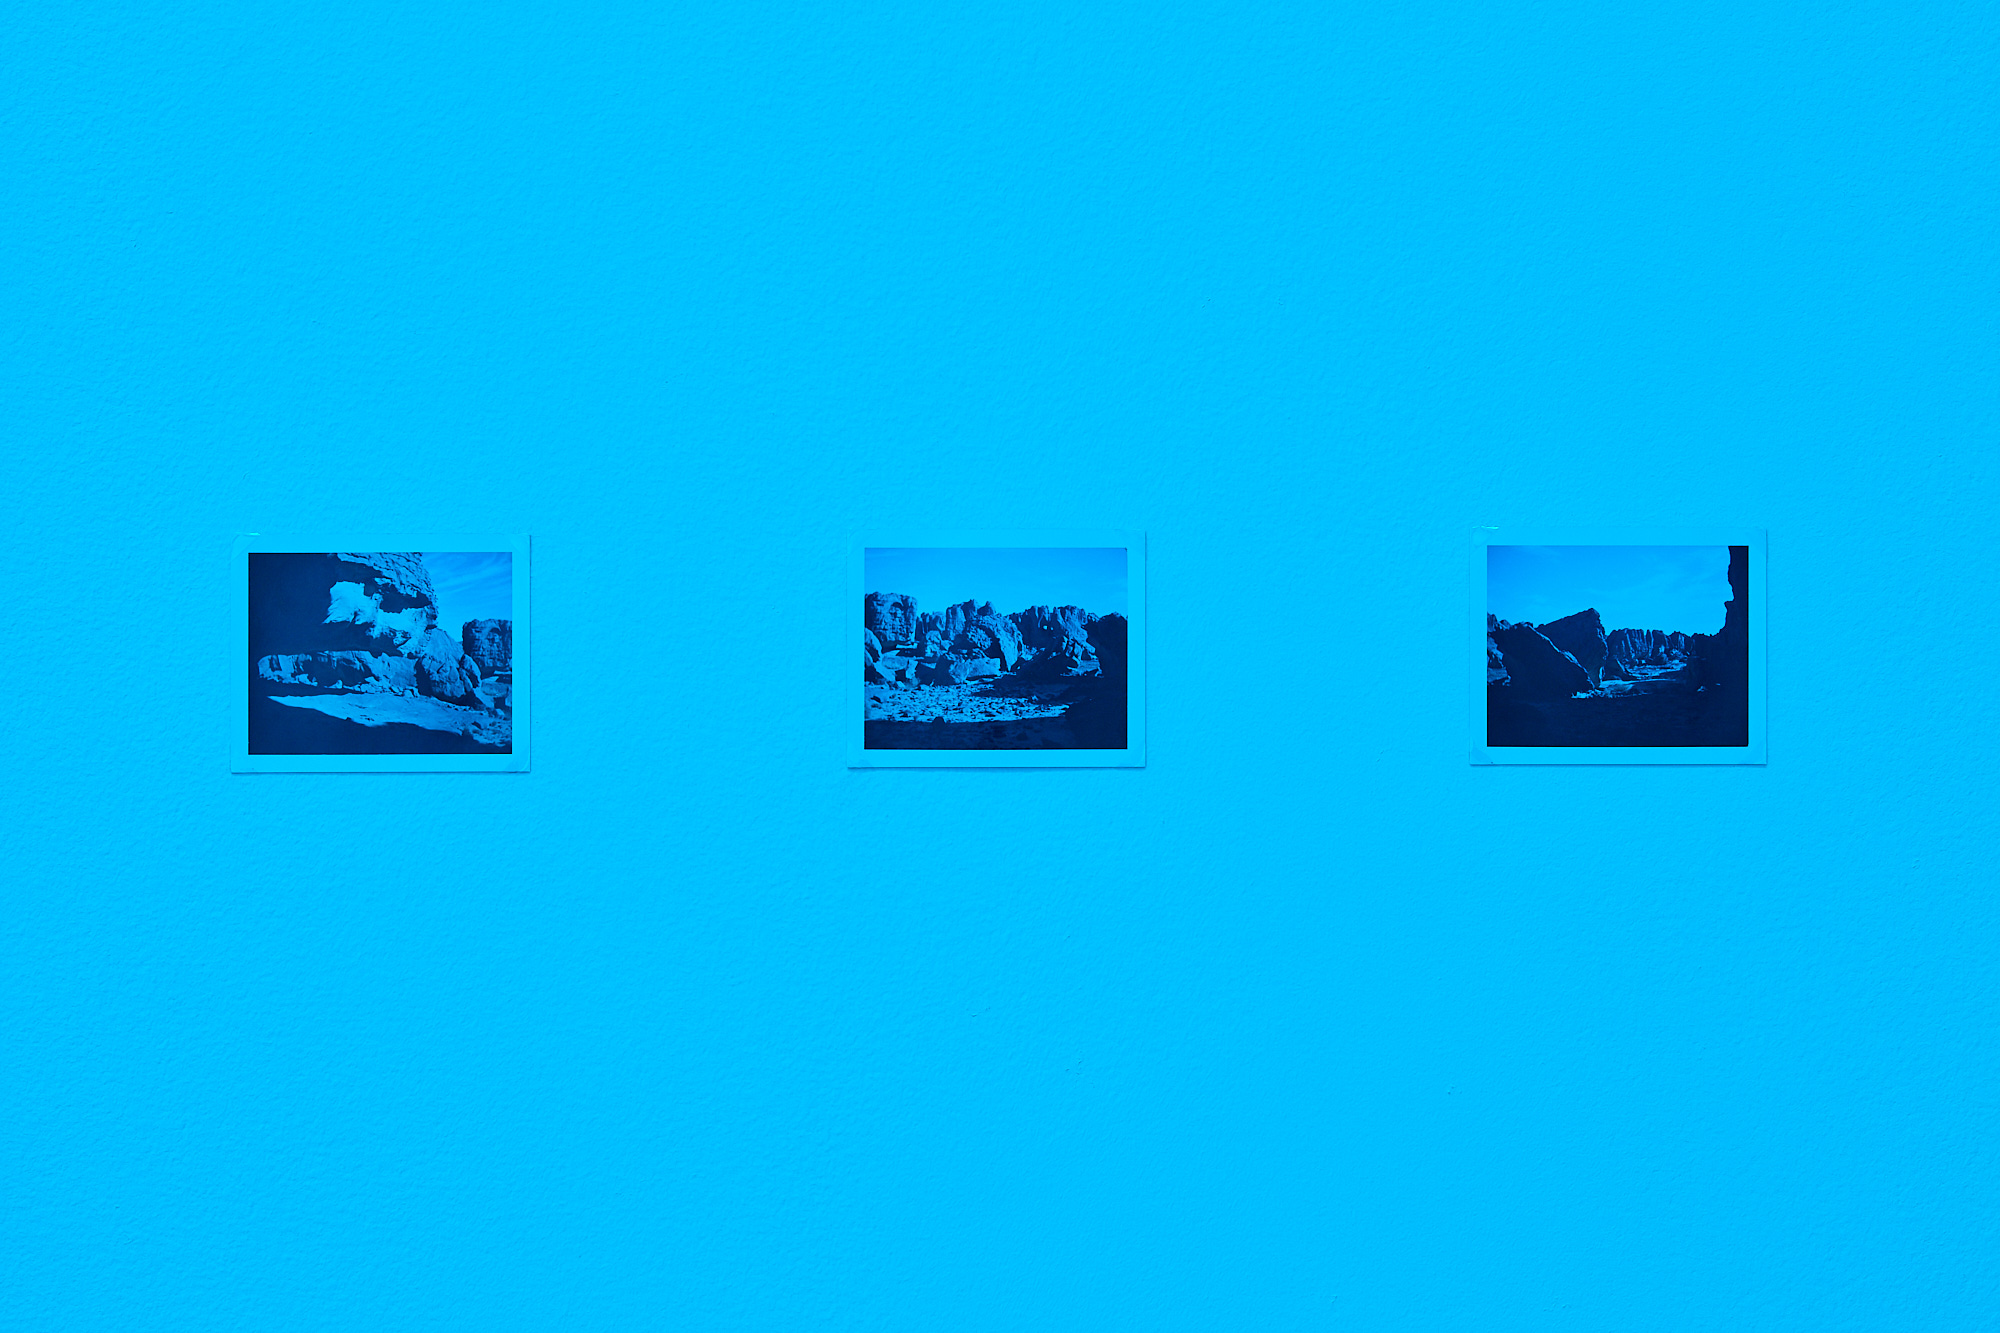 three image of rocky formations in bright sunlight hang side by side on the wall in a blue-tinted room